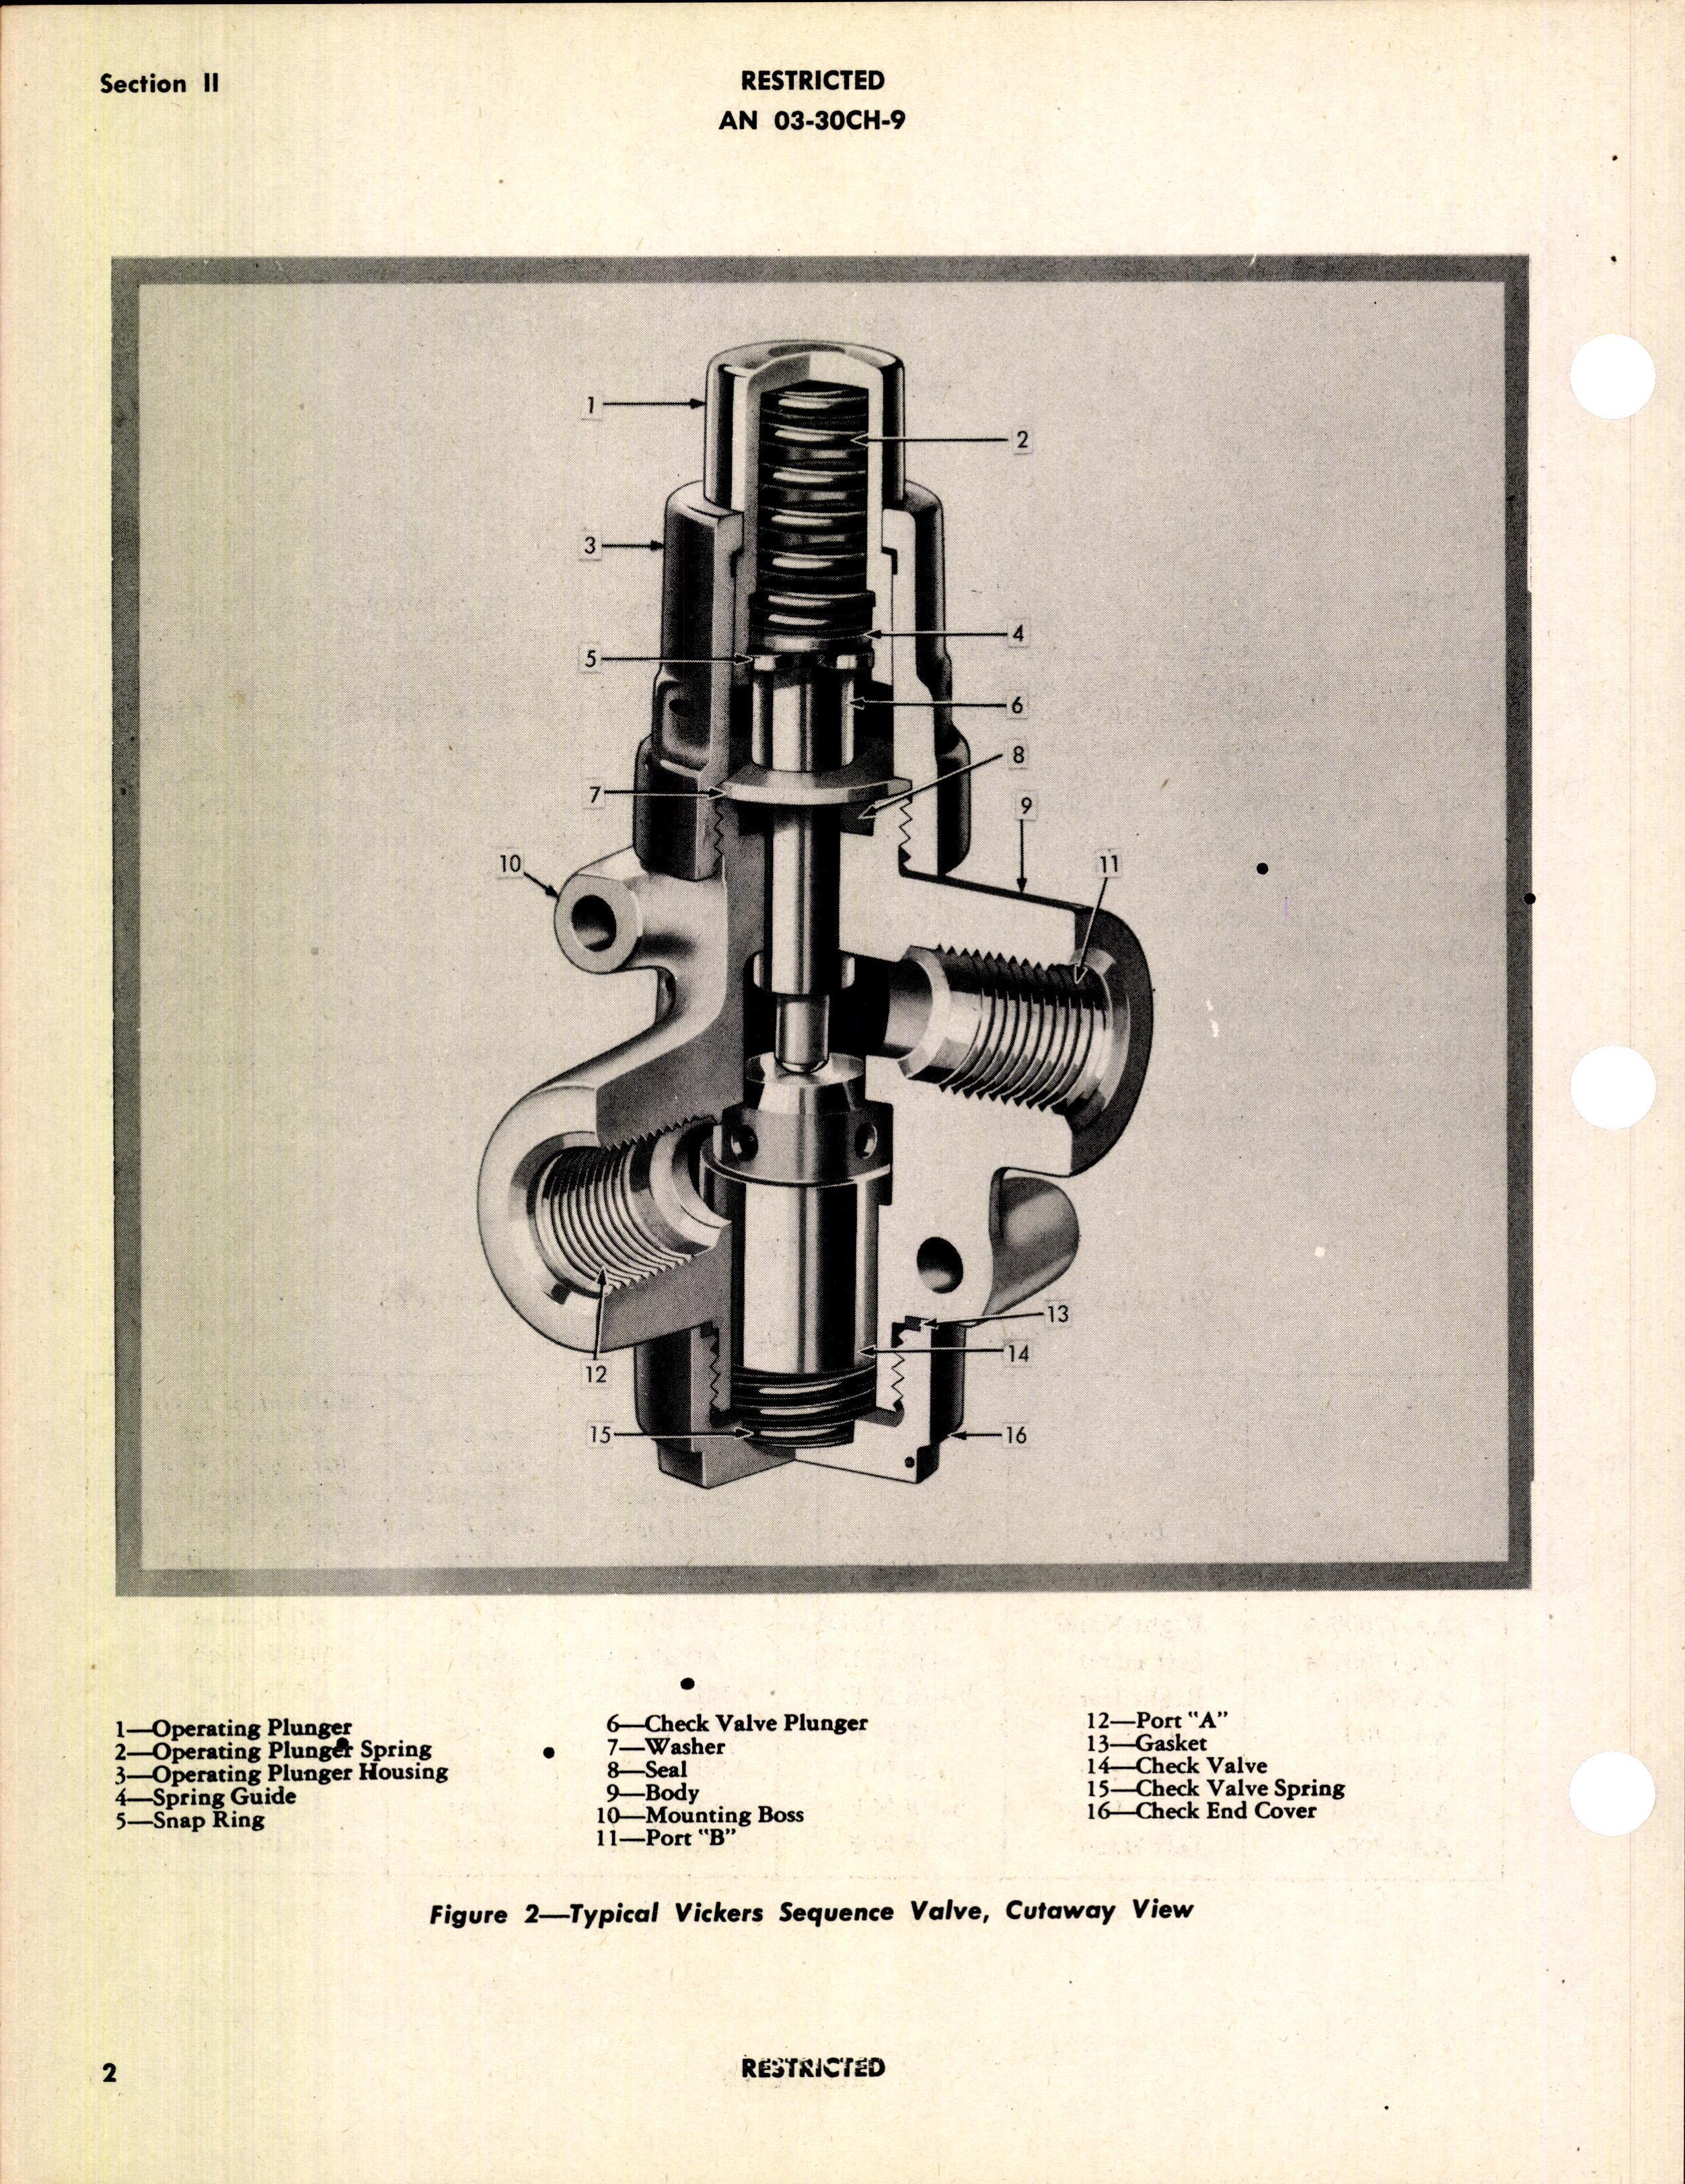 Sample page 6 from AirCorps Library document: Handbook of Instructions with Parts Catalog for Mechanically Operated Sequence Valves